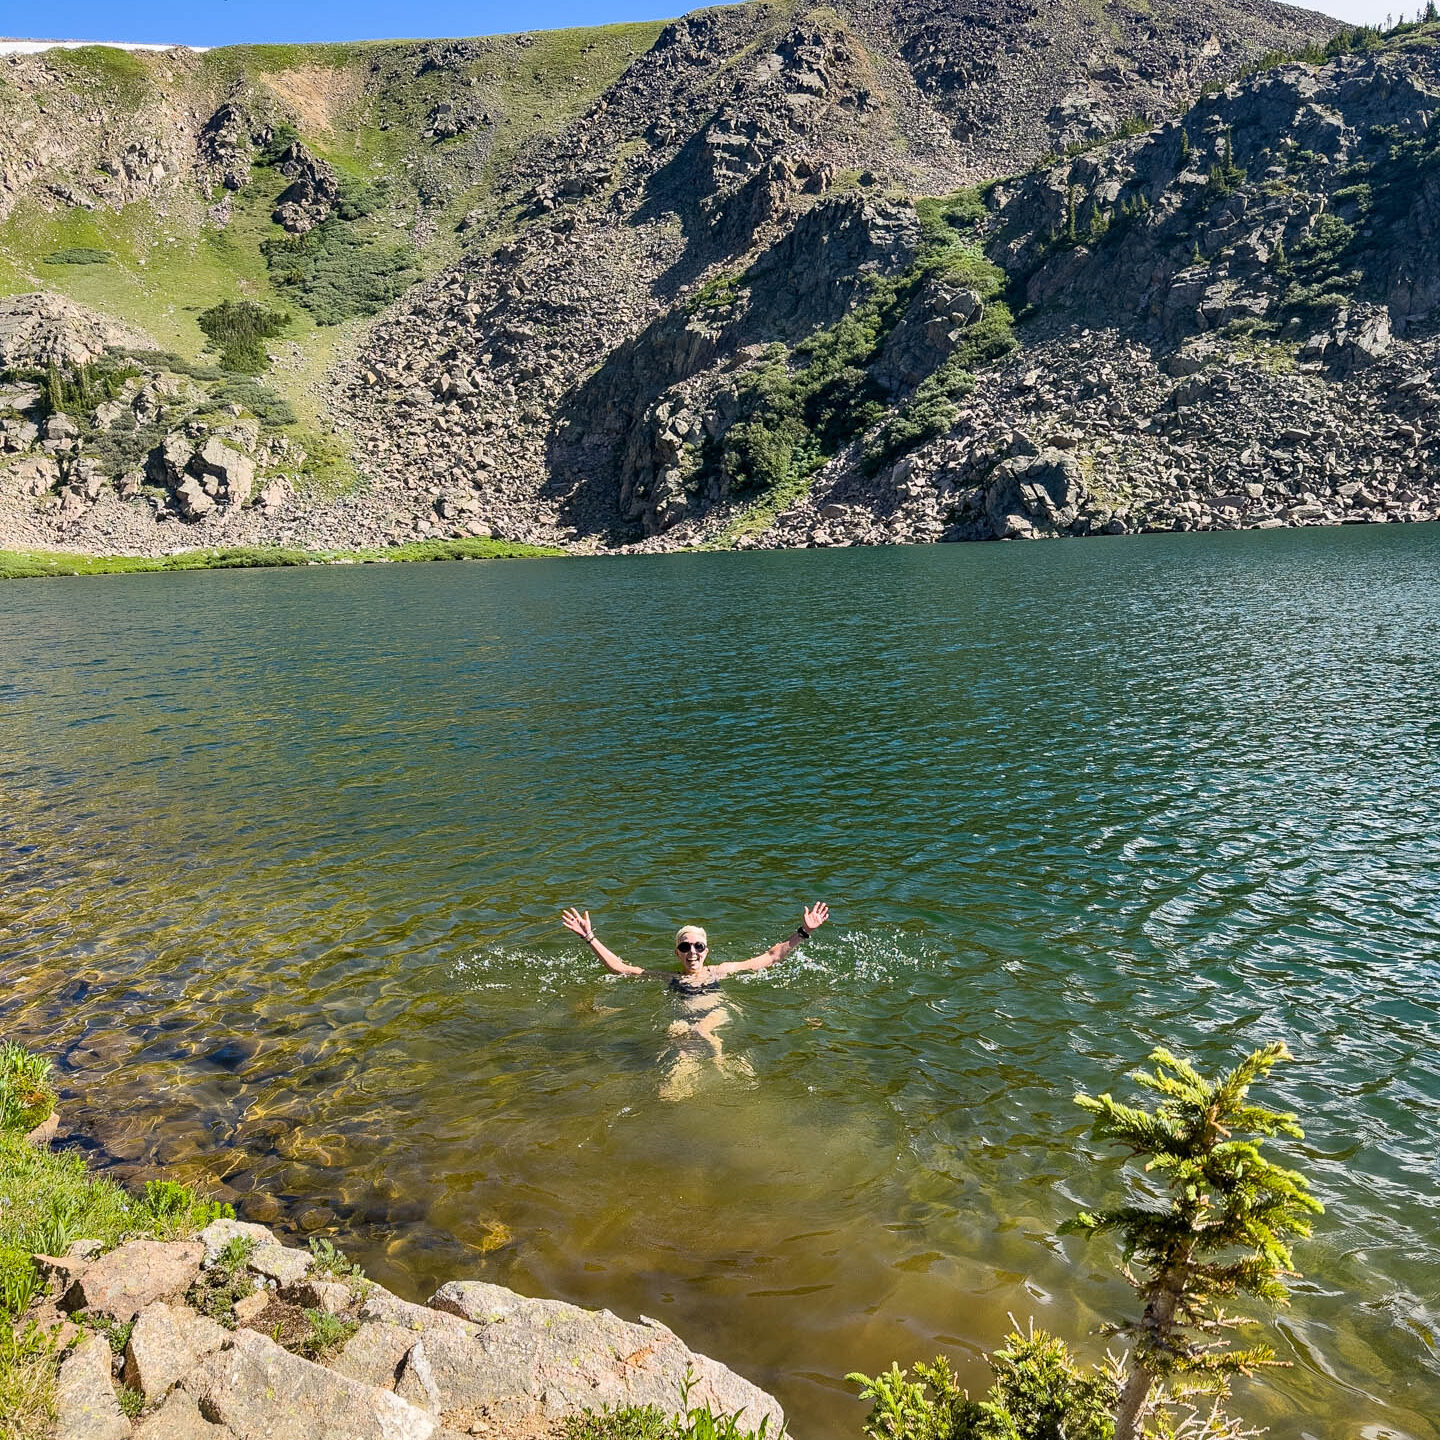 A woman swims in a lake in Colorado.